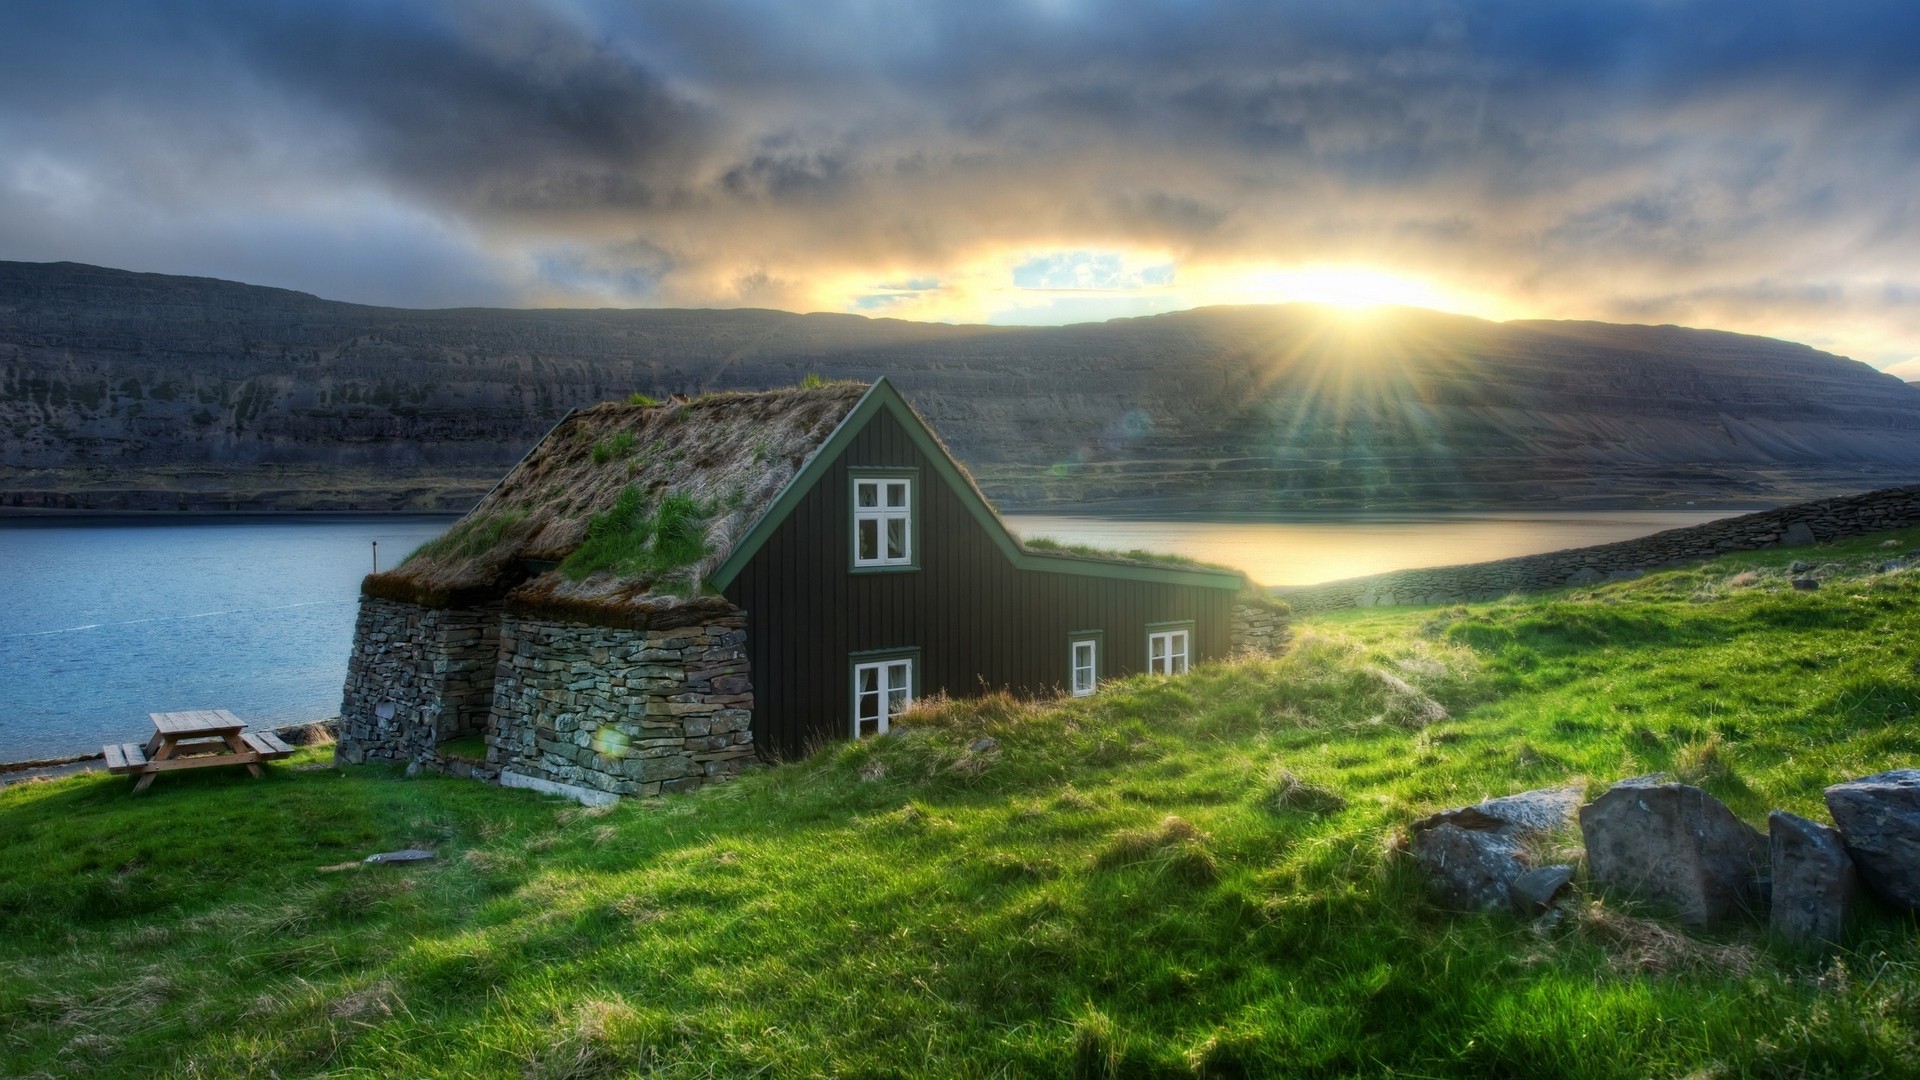 1920x1080 wallpapers: iceland, the house, stones, sunset, hermit, mountains (image)